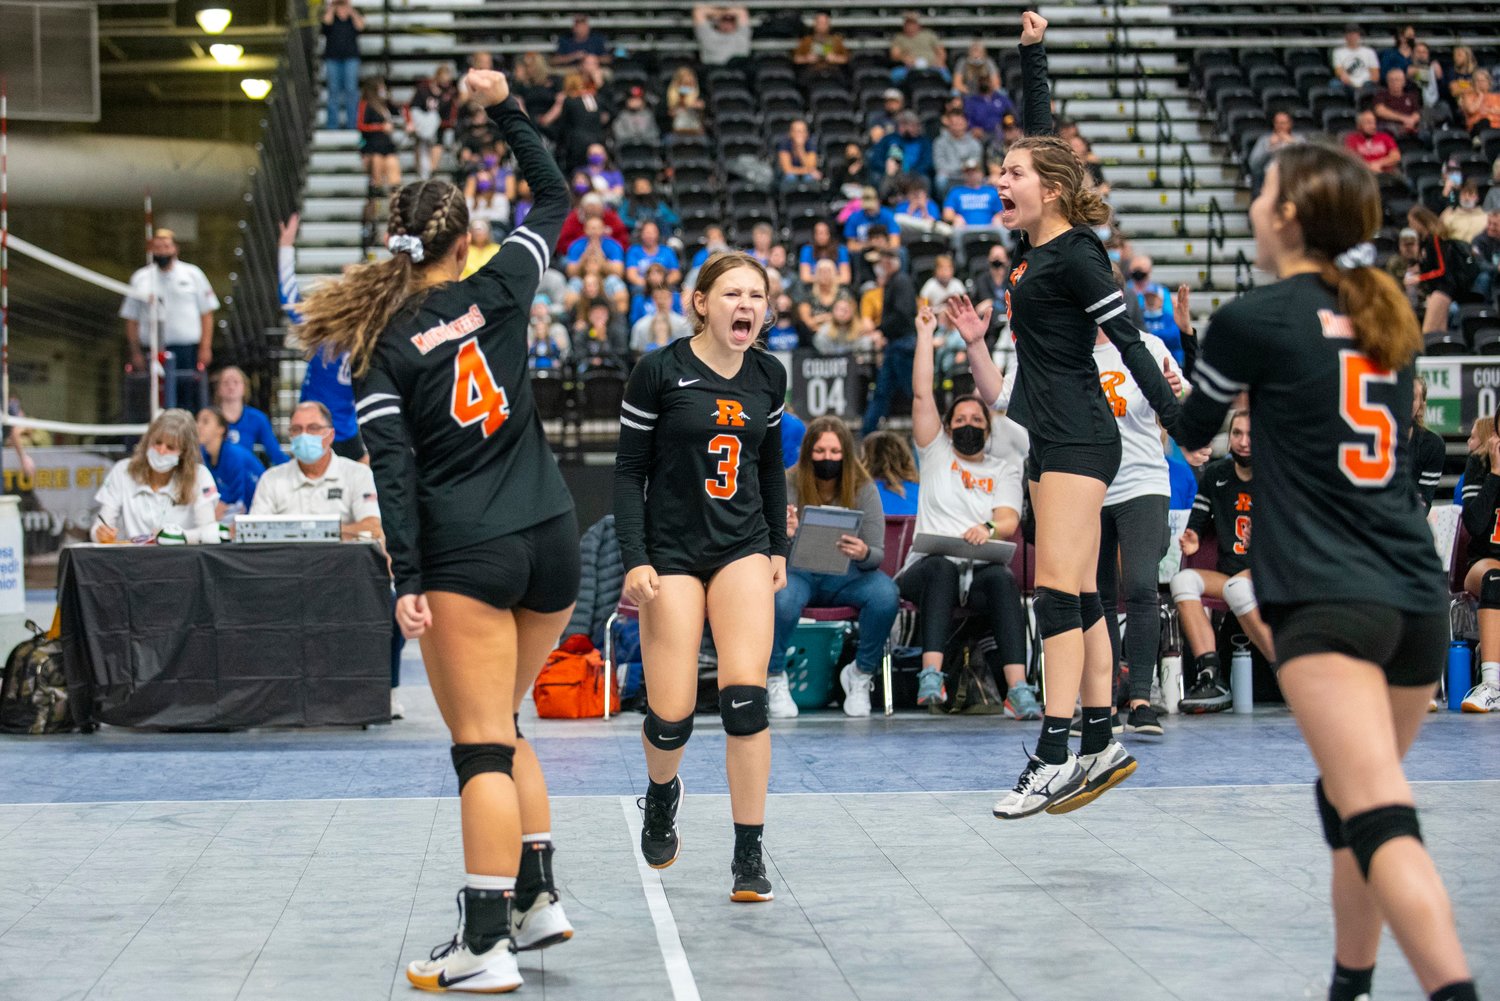 Rainier players celebrate after scoring against La Conner in the first round of the state tournament Thursday in Yakima.